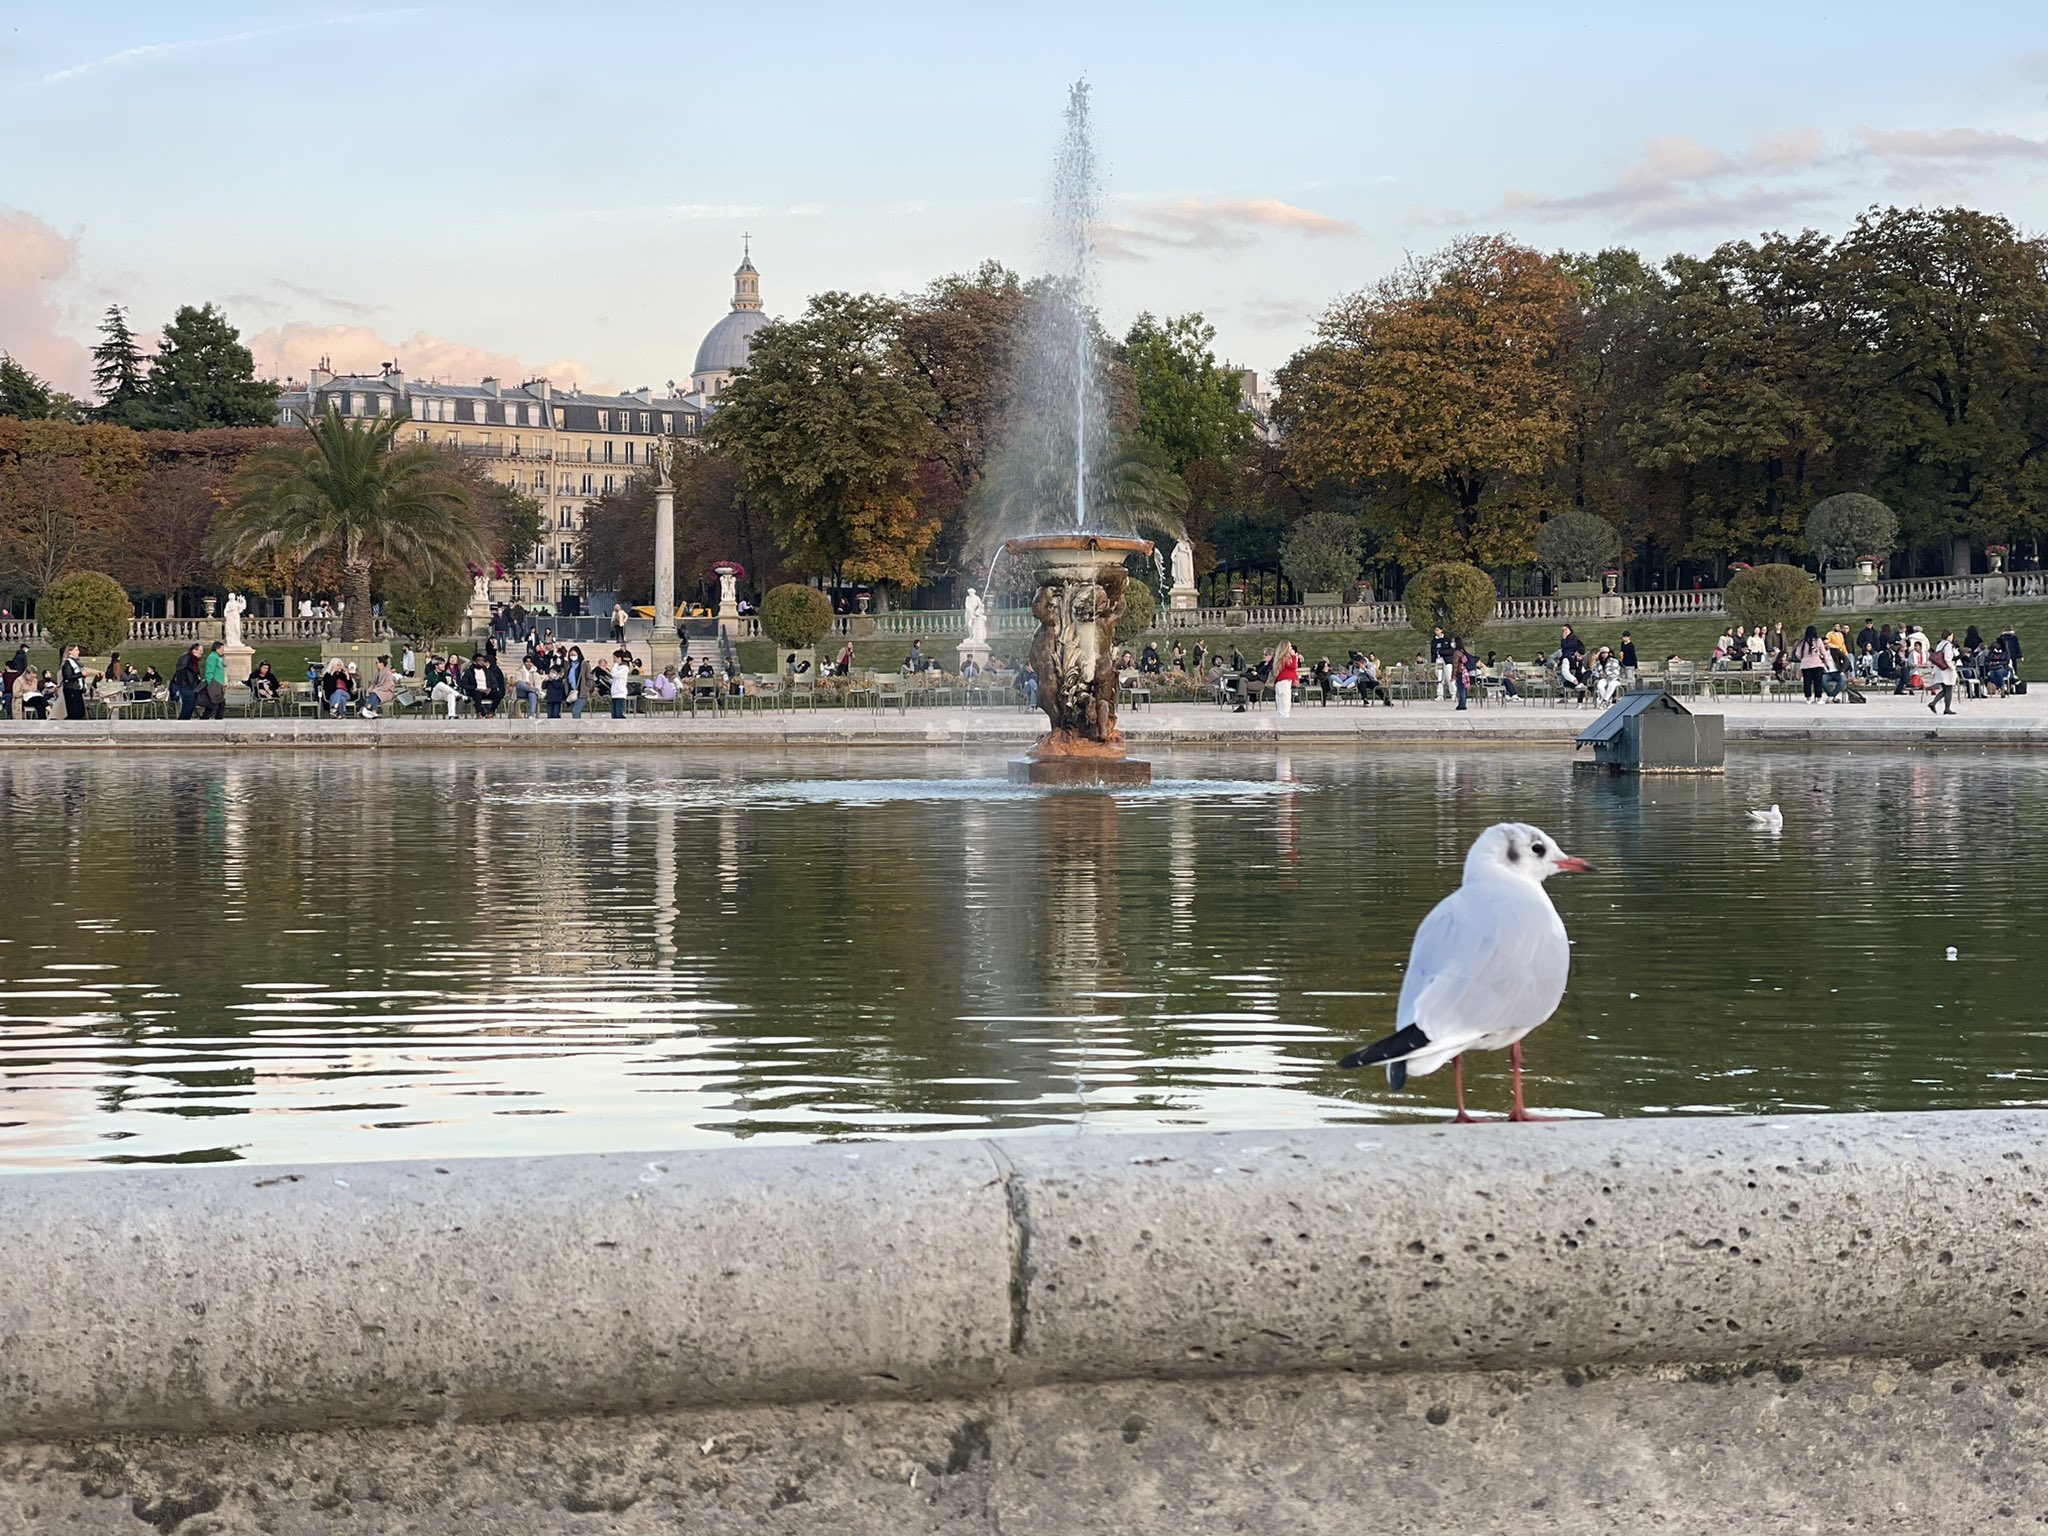 We reached the Jardin du Luxembourg at Golden Hour